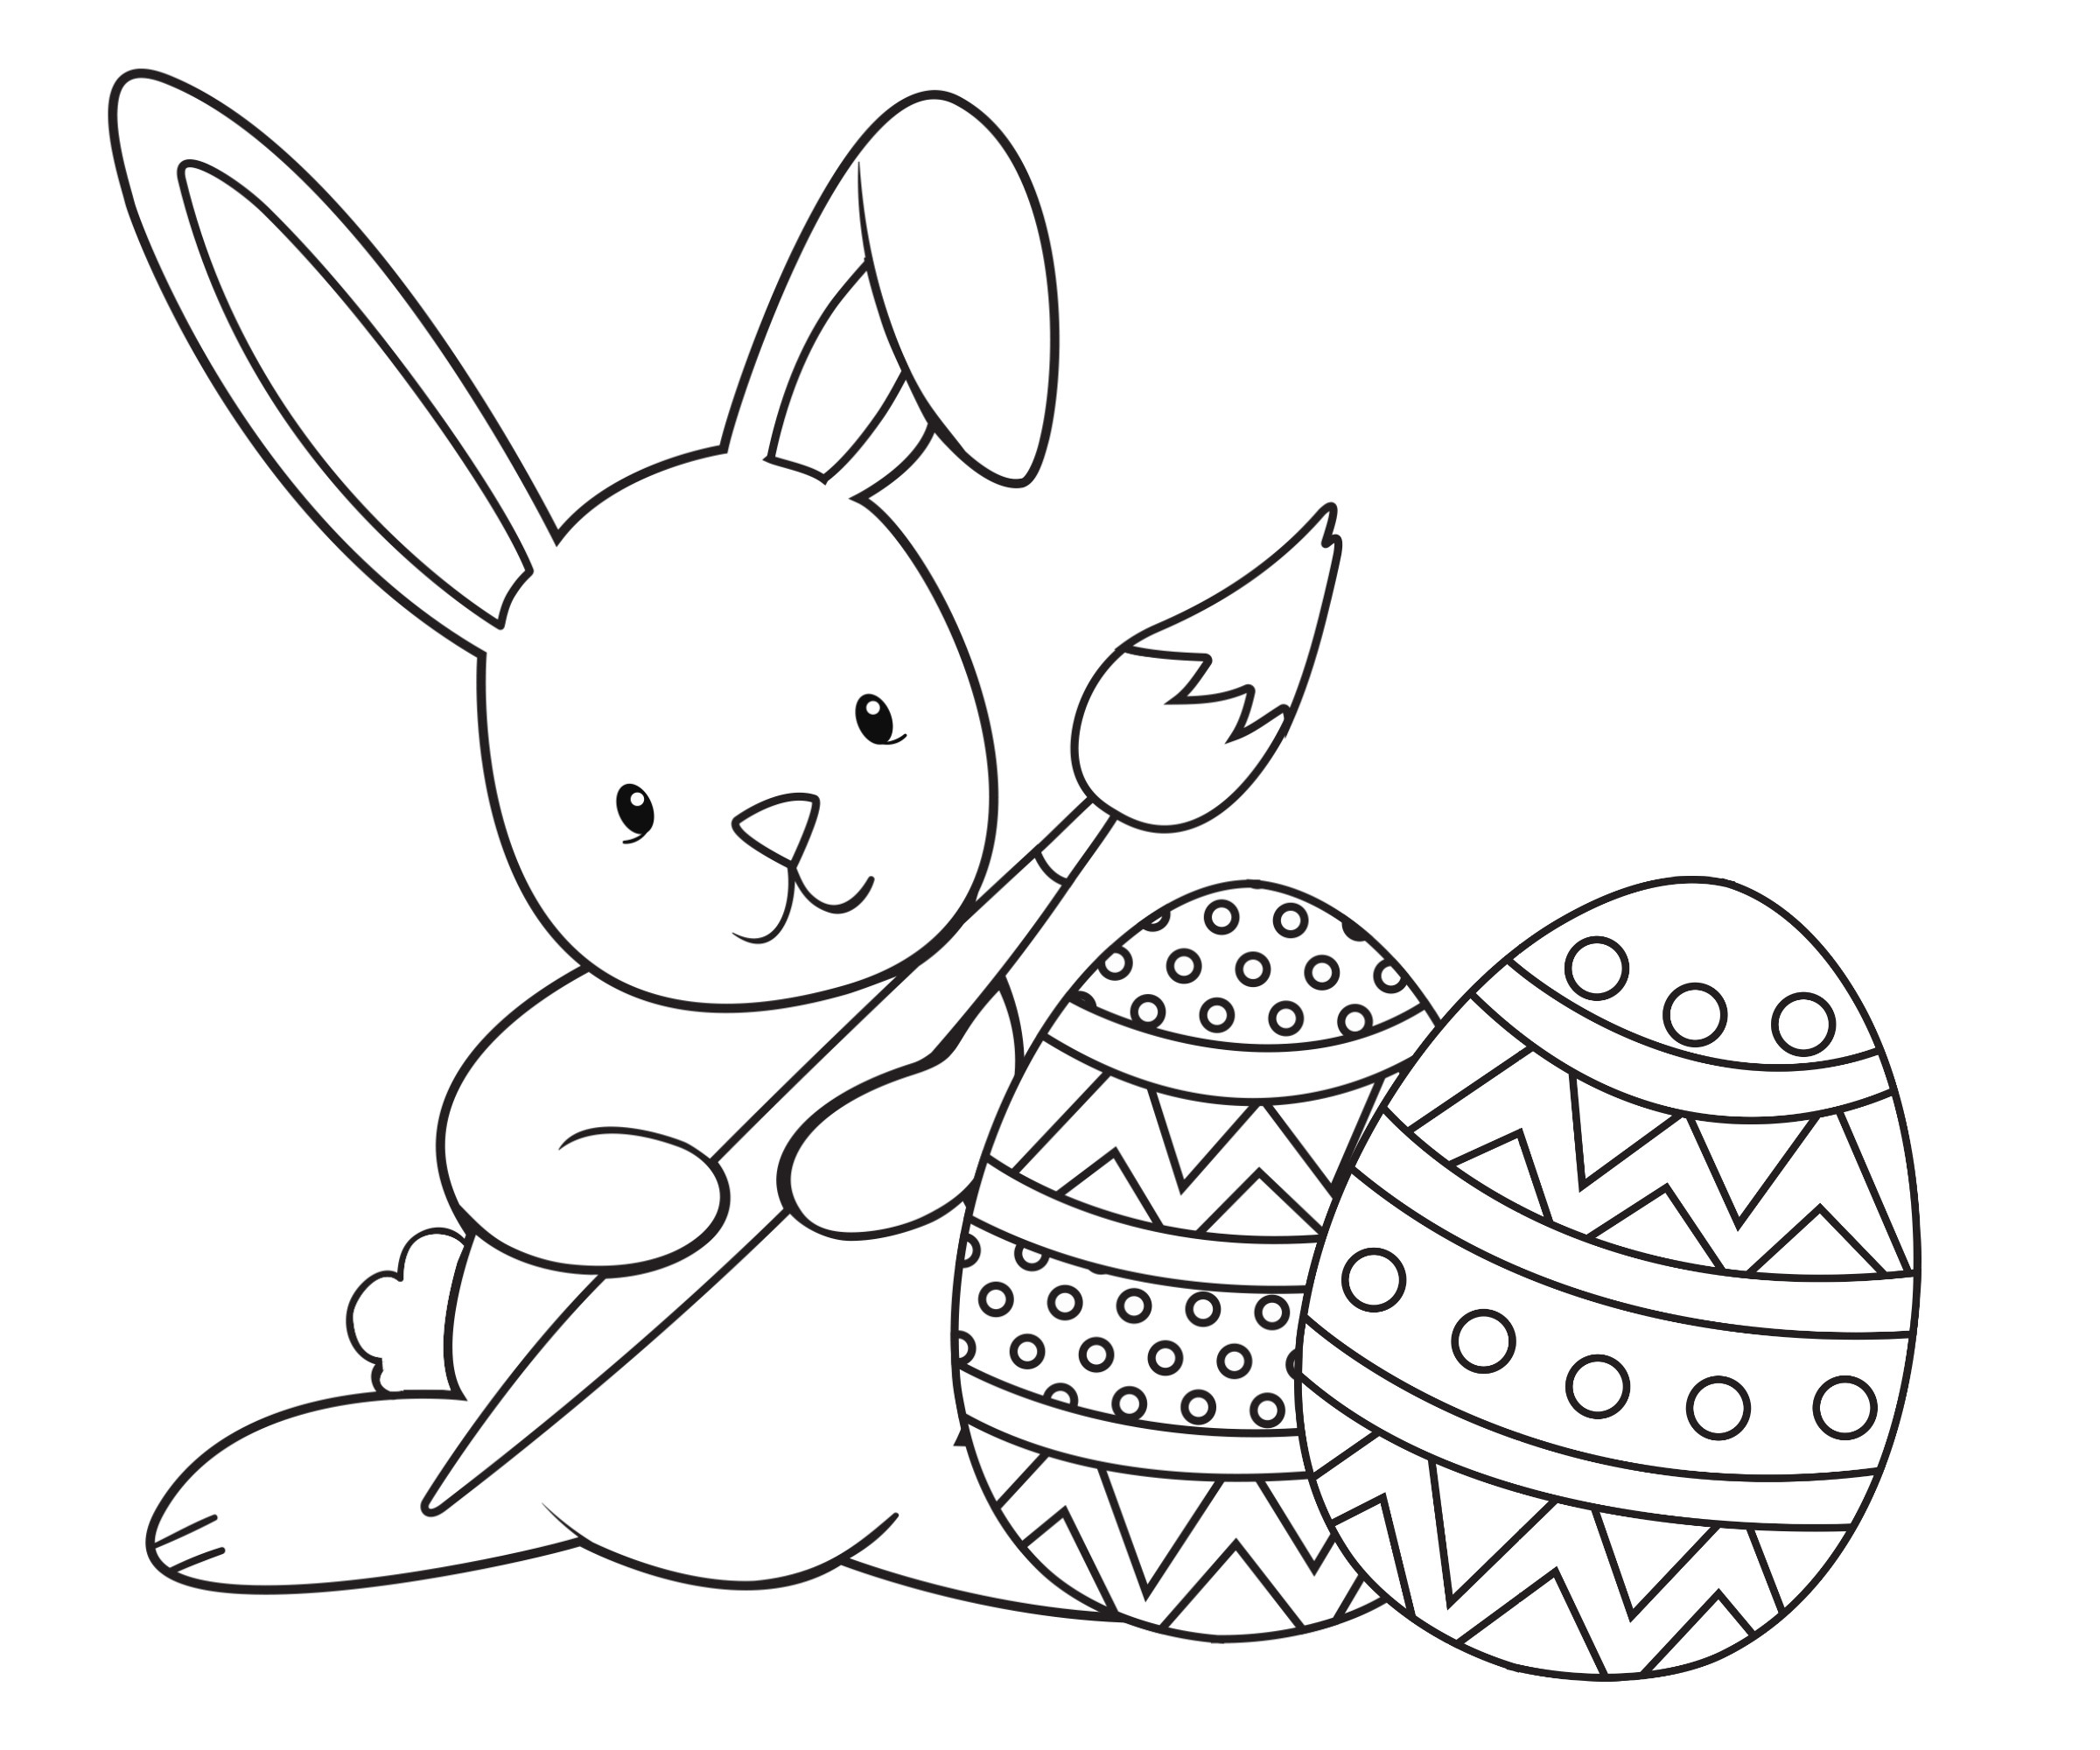 The 20 Best Ideas for Free Easter Coloring Pages for toddlers - Home